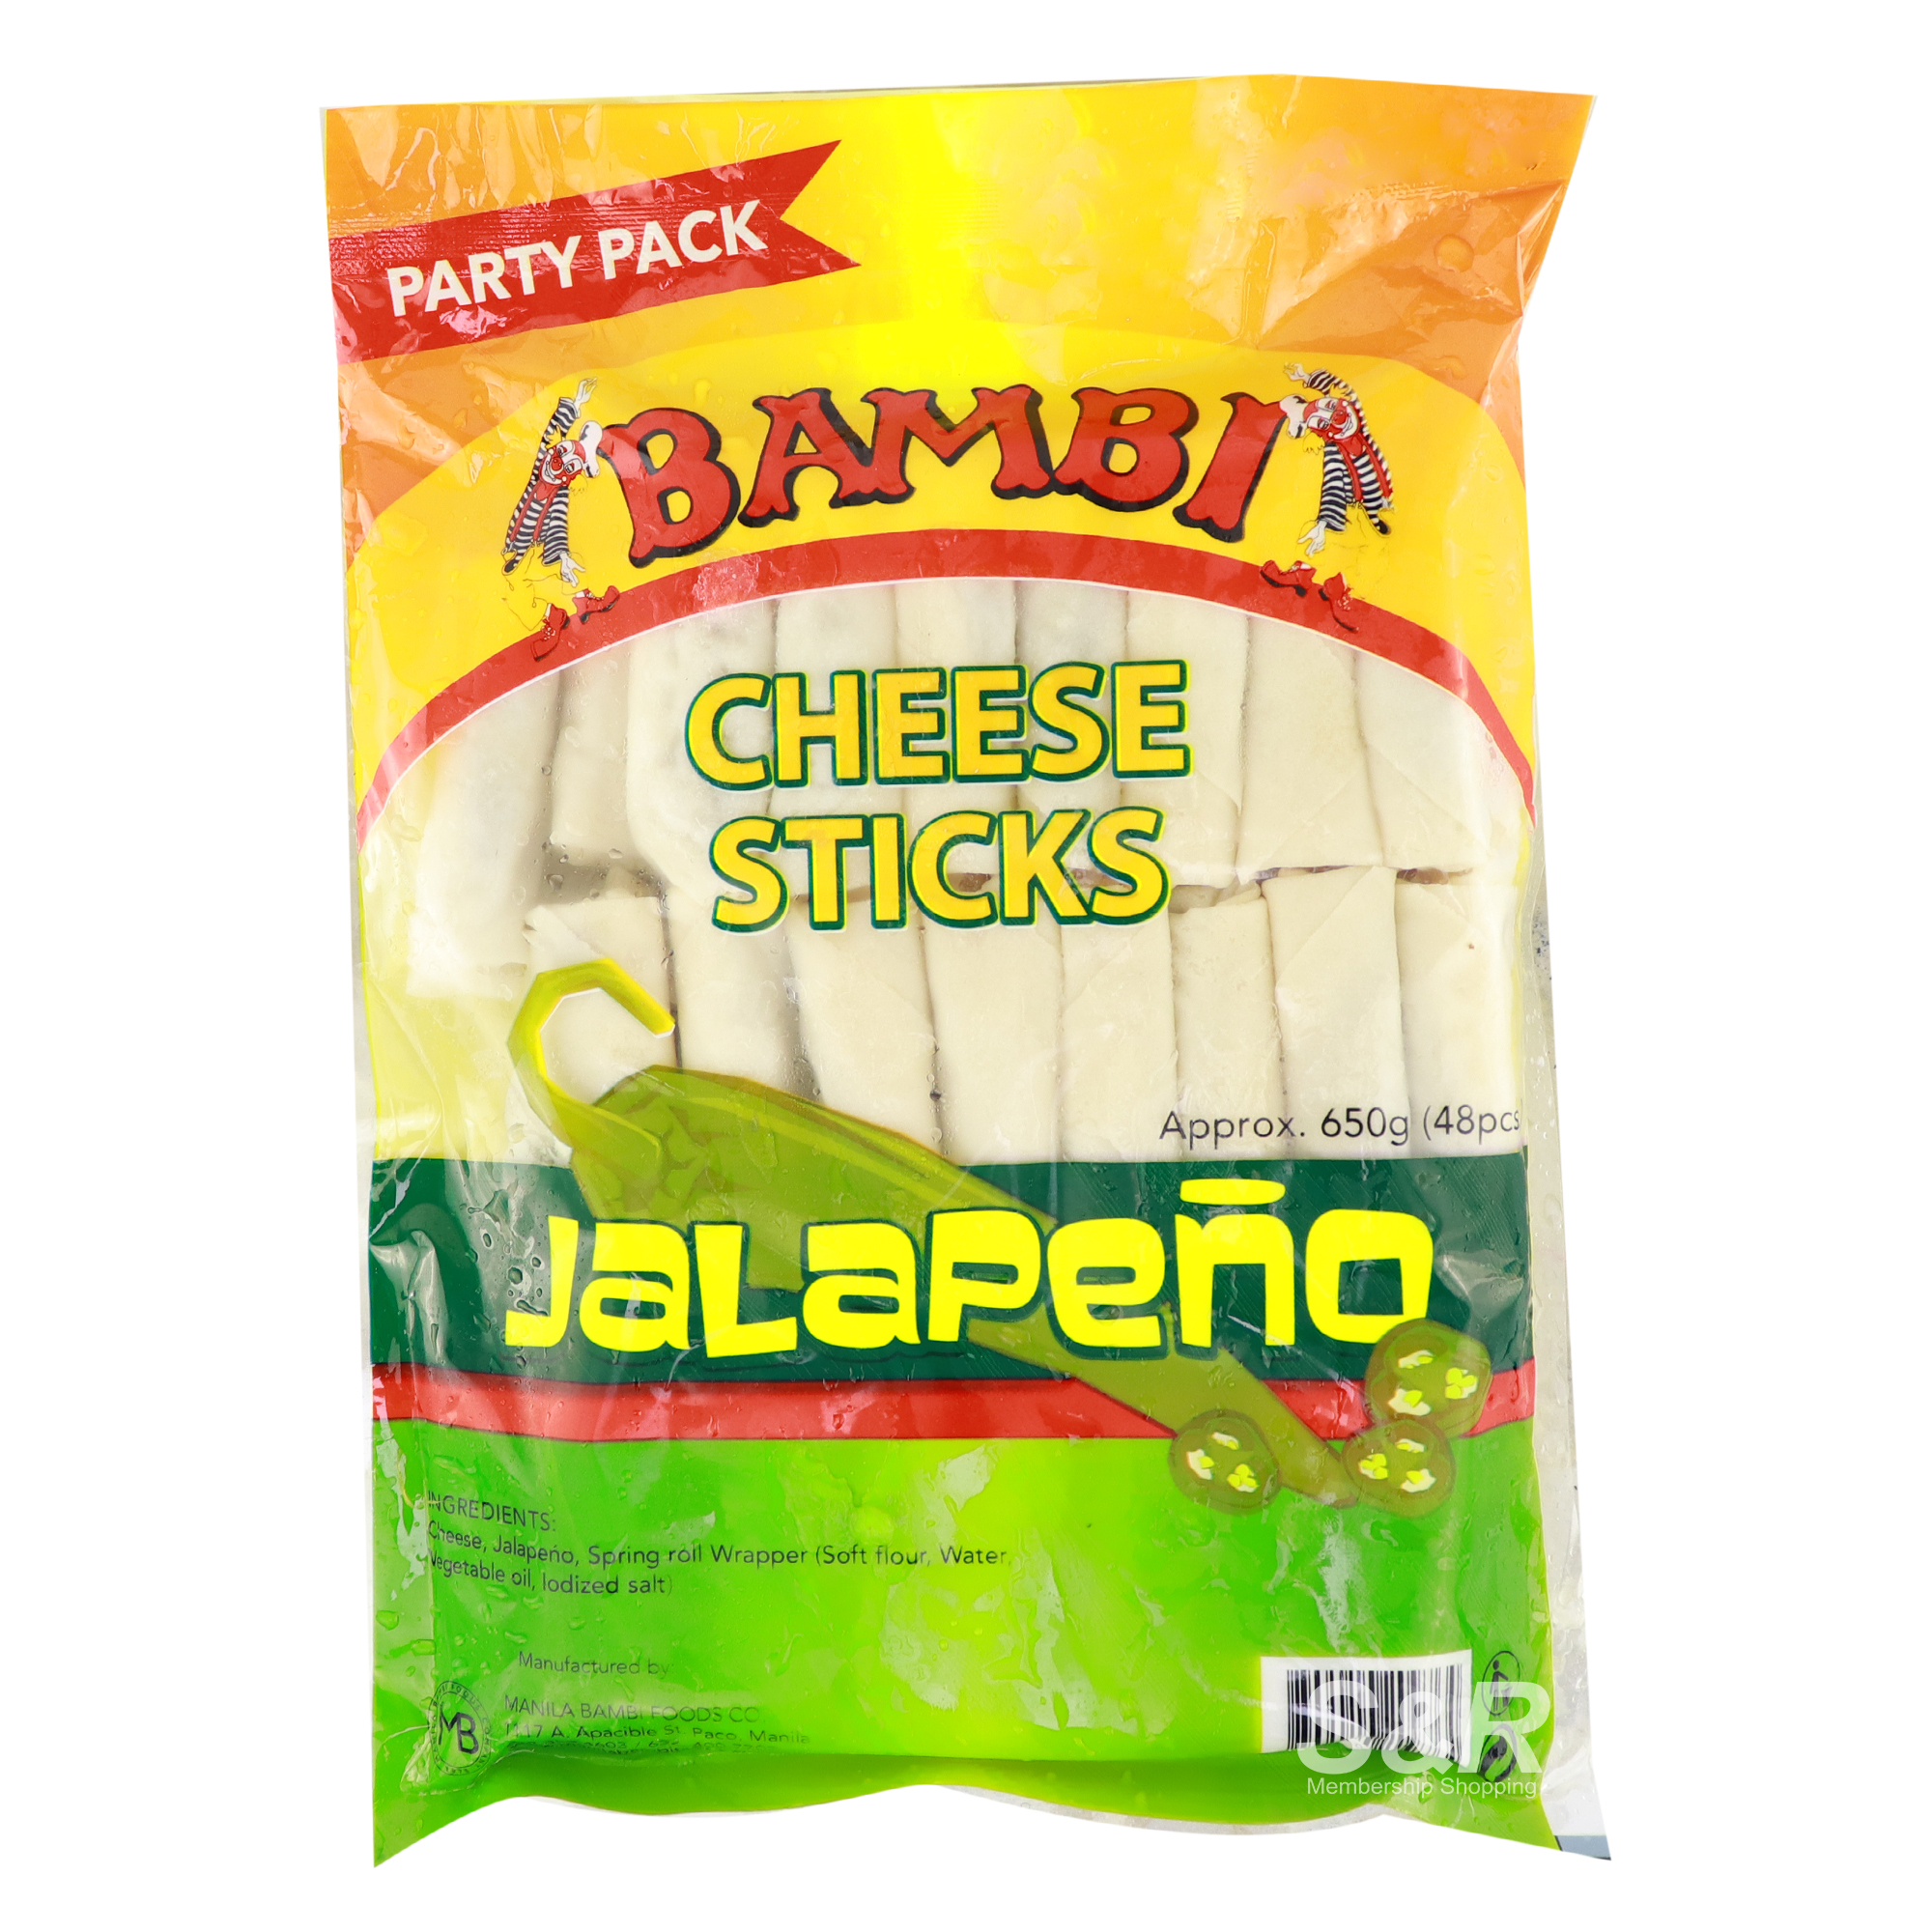 Bambi Cheese Sticks Jalapeno Party Pack 650g